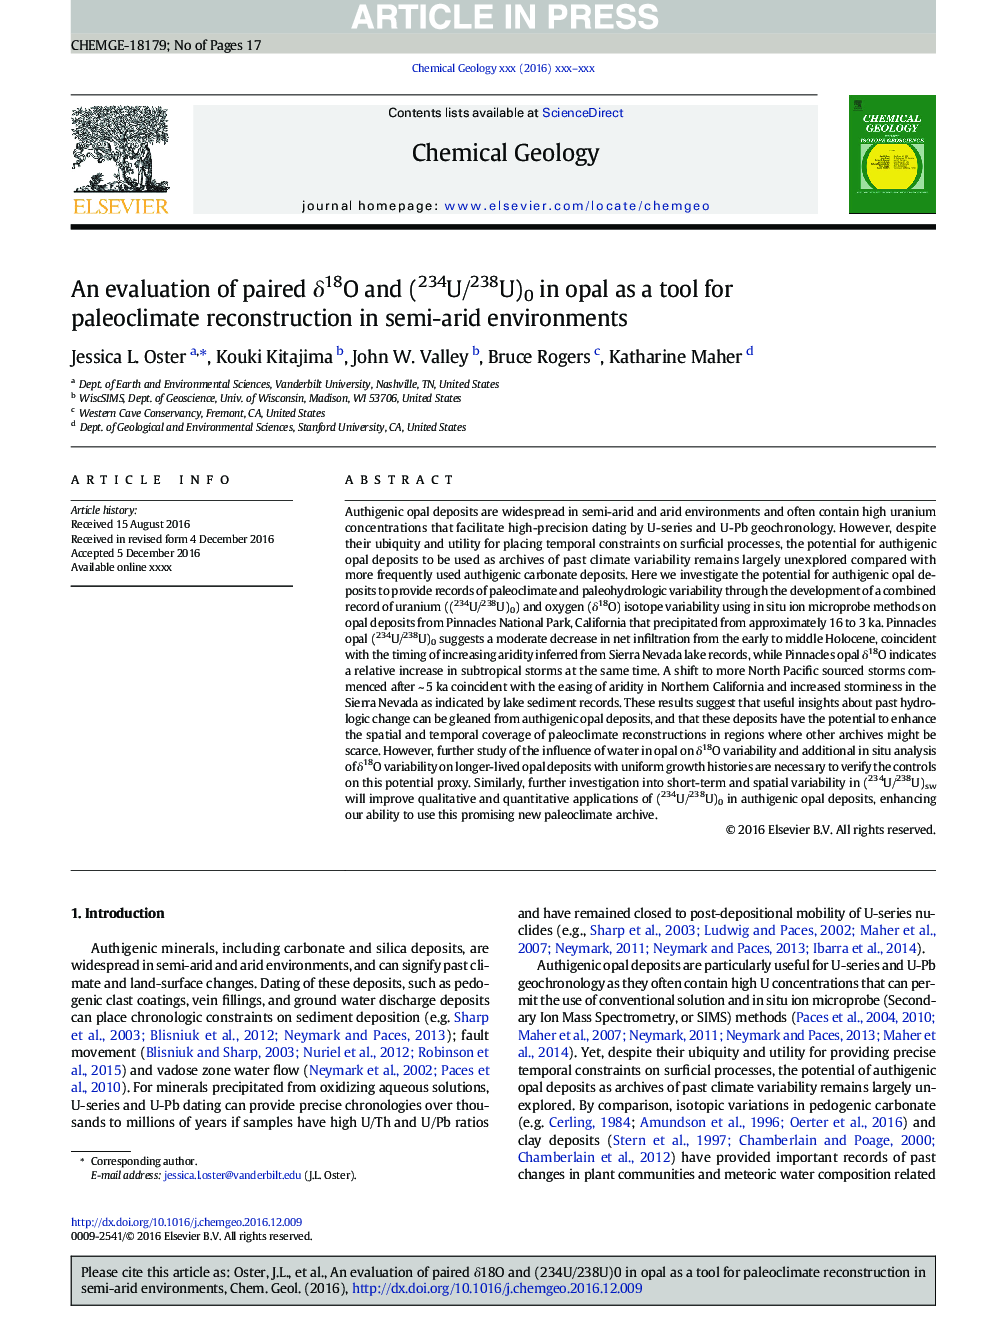 An evaluation of paired Î´18O and (234U/238U)0 in opal as a tool for paleoclimate reconstruction in semi-arid environments